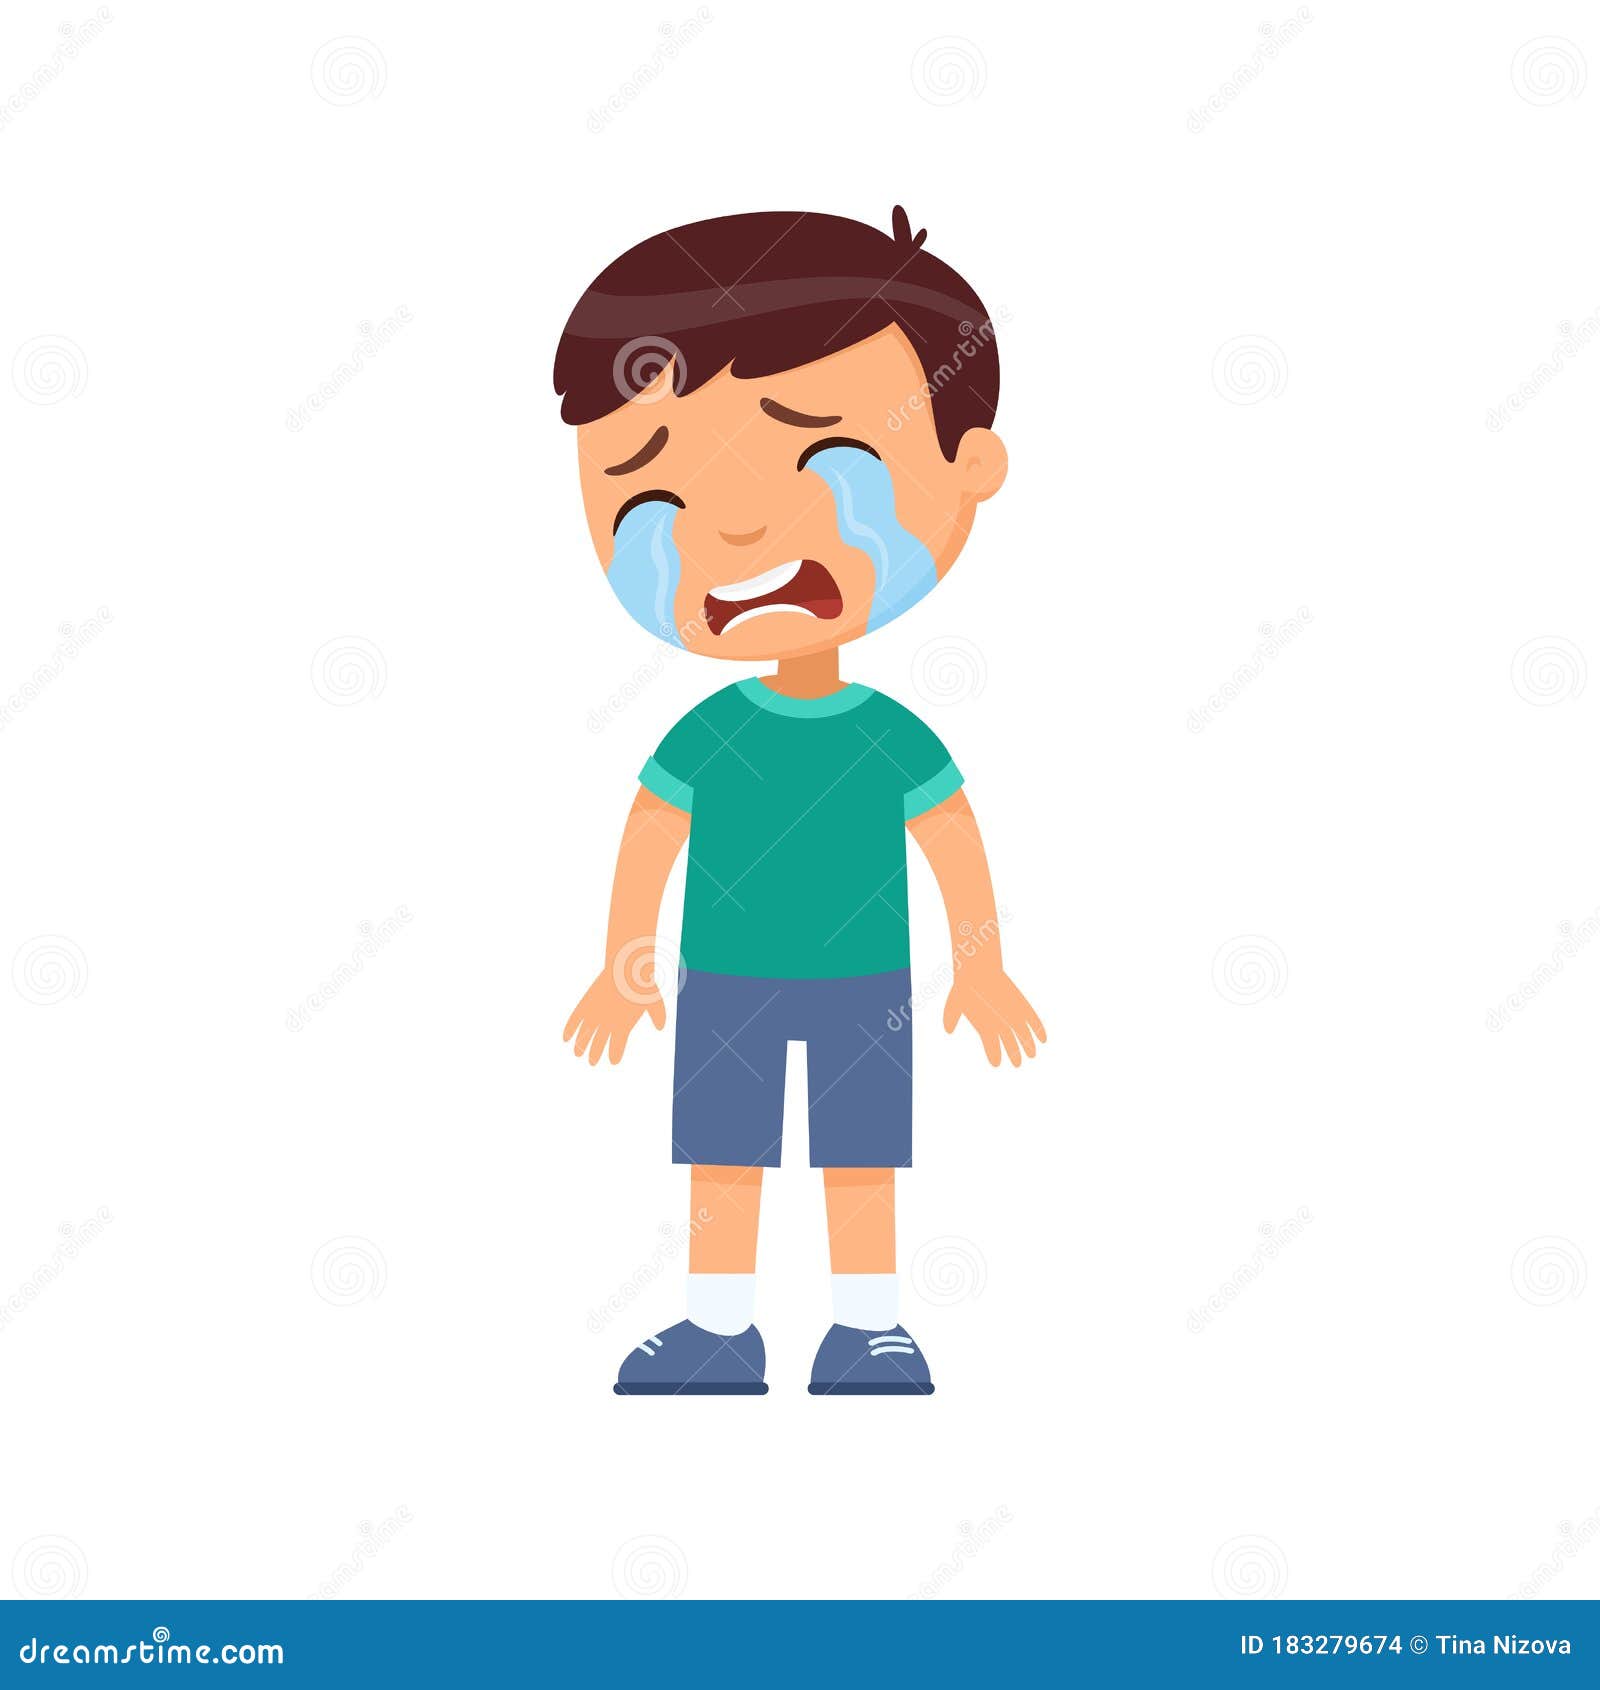 Crying Sad Little Boy Flat Vector Illustration. Upset Child with Tears on  Face Standing Alone Cartoon Character Stock Vector - Illustration of pain,  cute: 183279674